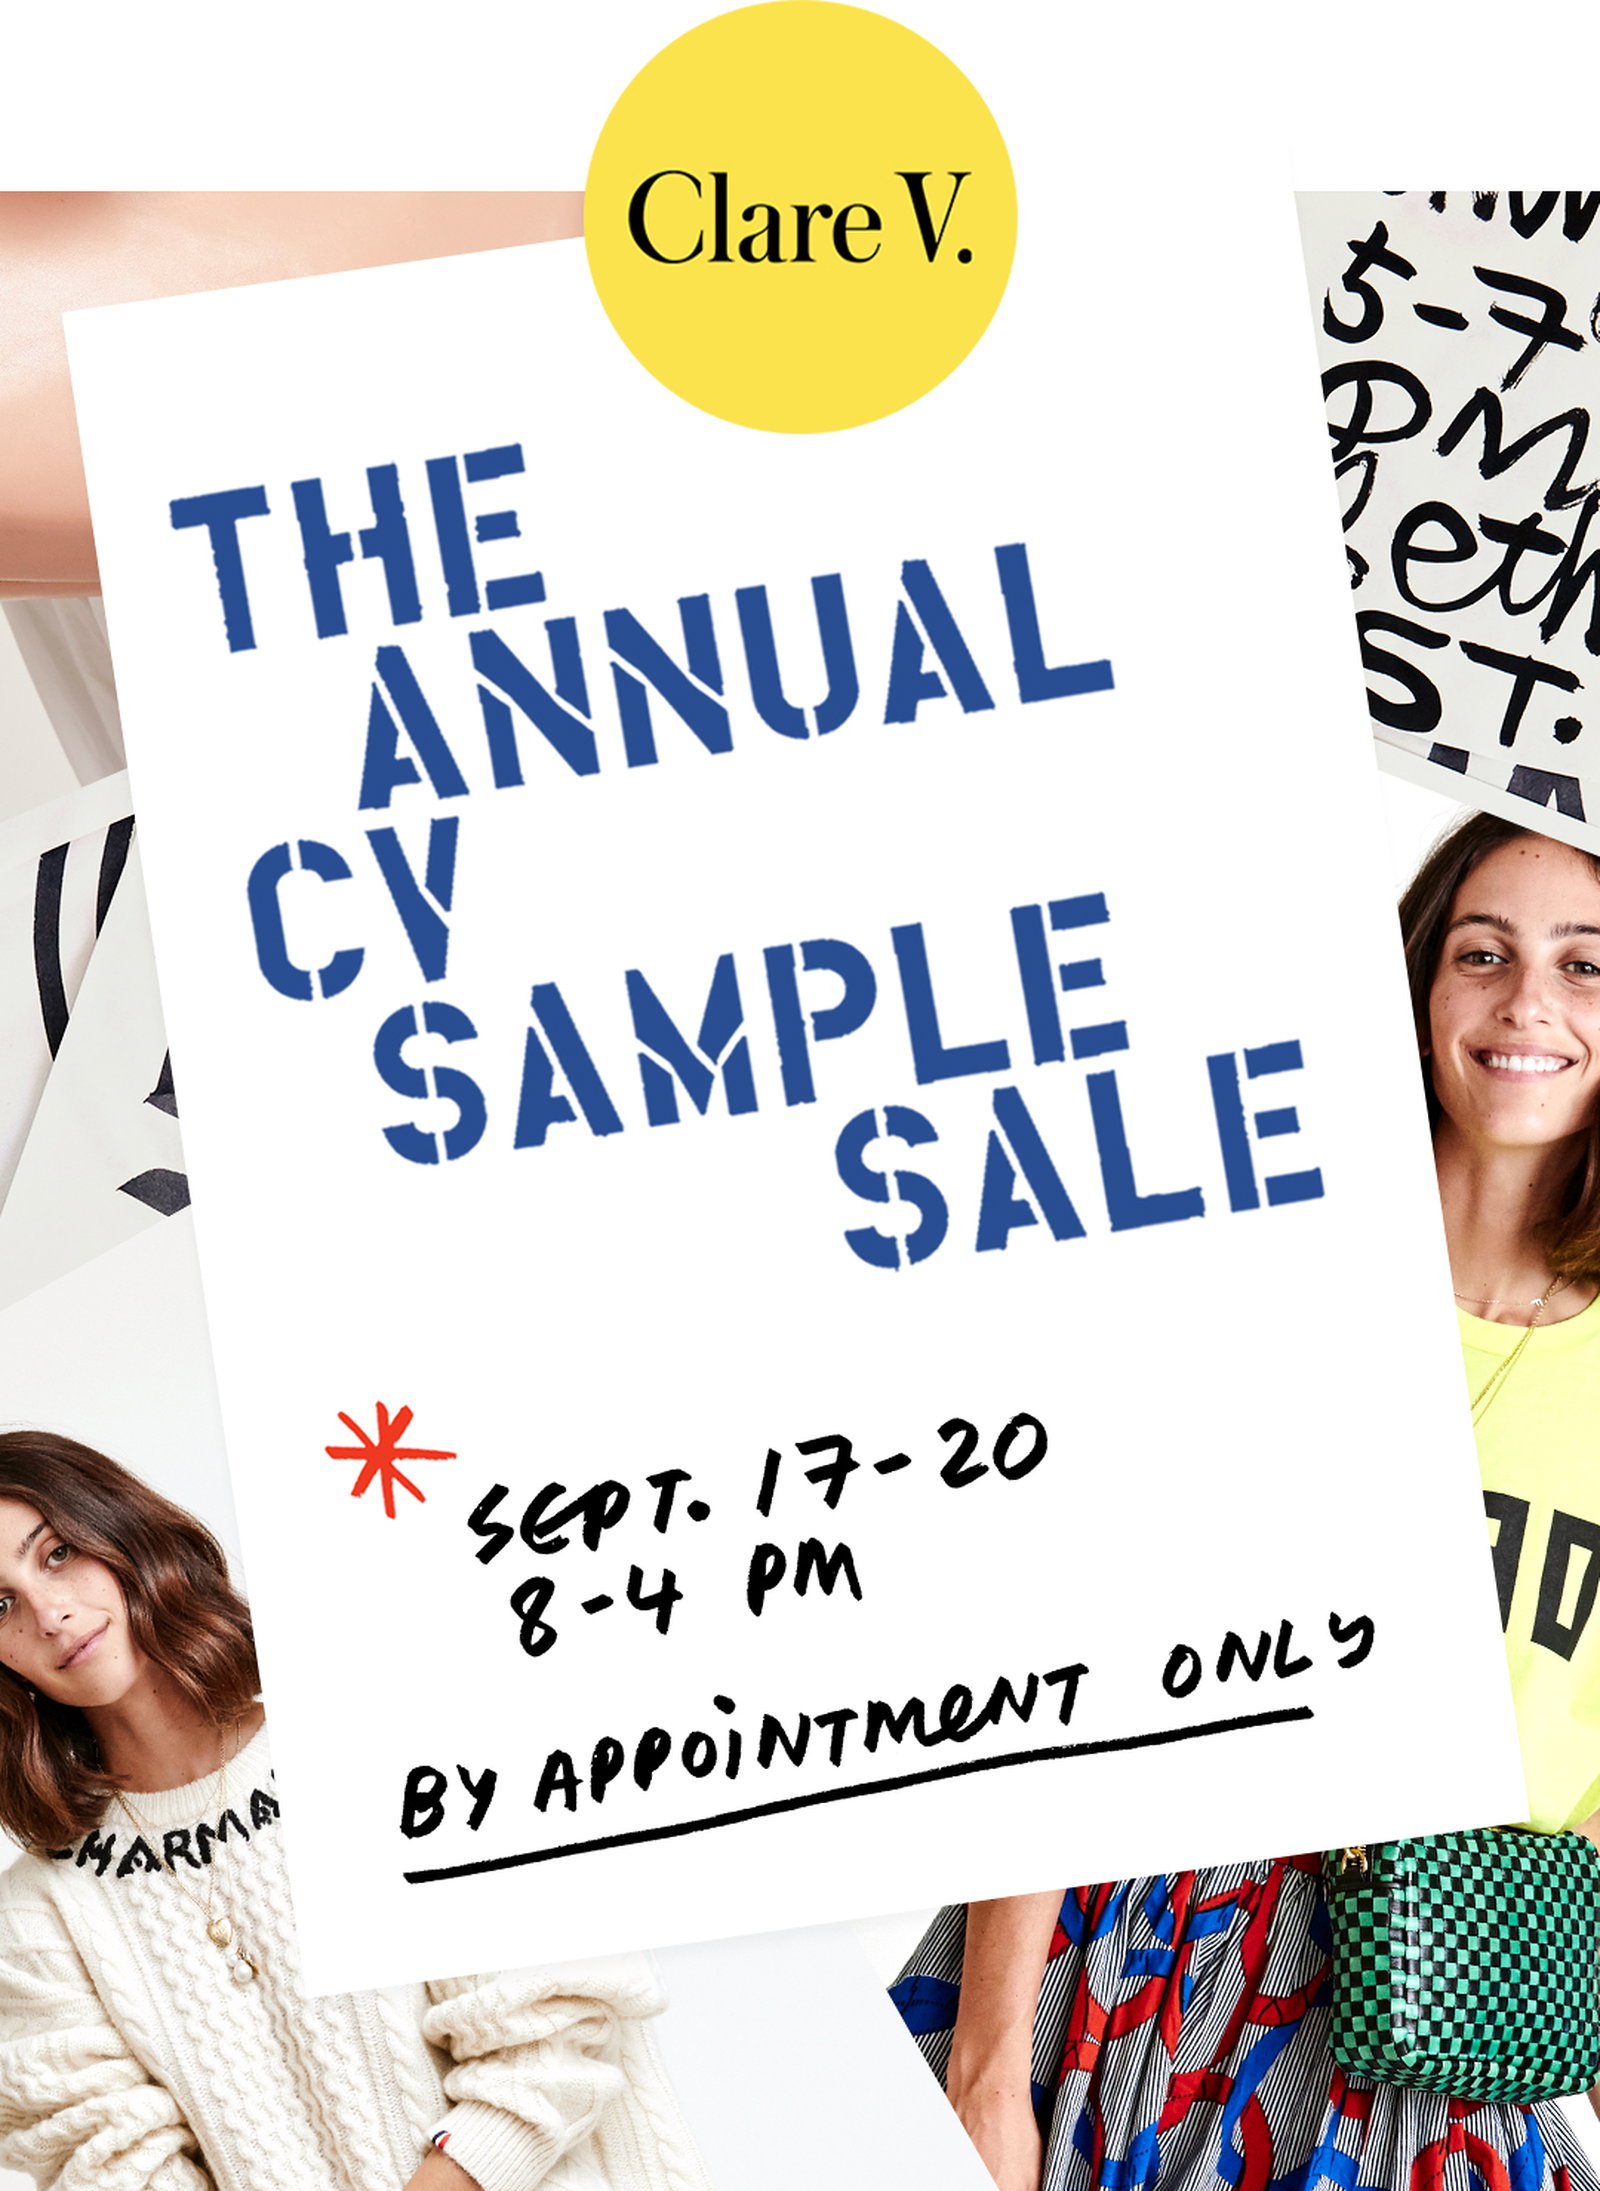 Our sample sale starts tomorrow! Cute bags for you and your cute friends. Clare  V. Sample Sale 9/22 from 8-6PM and 9/23 9-5PM @rowdtla…